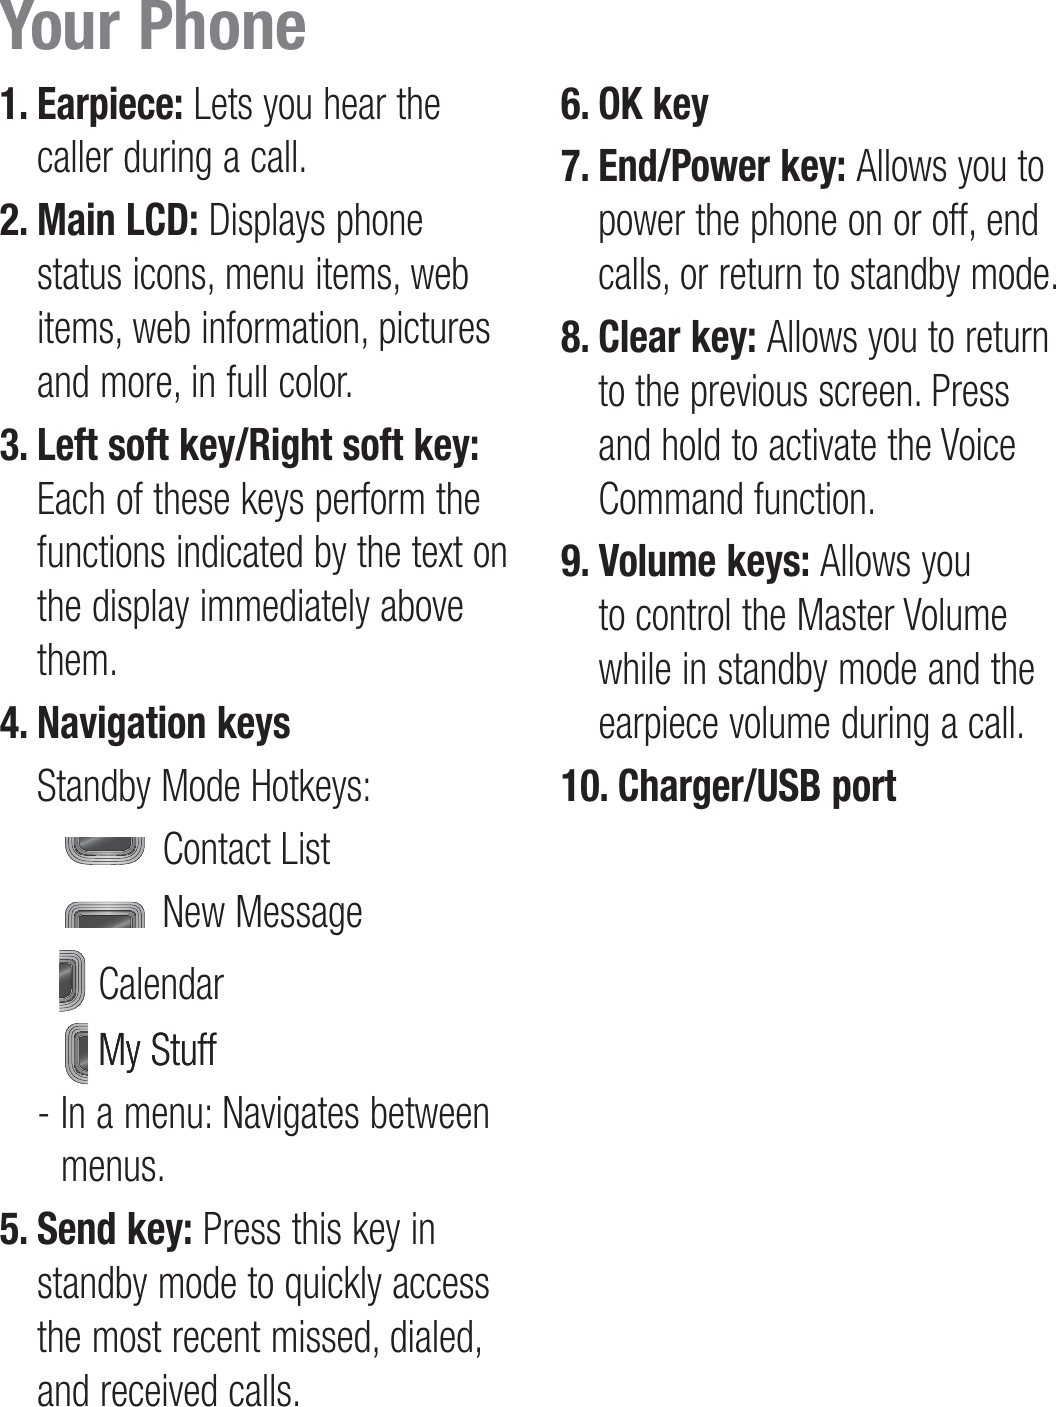 1. Earpiece: Lets you hear the caller during a call.2. Main LCD: Displays phone status icons, menu items, web items, web information, pictures and more, in full color. 3. Left soft key/Right soft key: Each of these keys perform the functions indicated by the text on the display immediately above them.4. Navigation keys  Standby Mode Hotkeys: Contact List New Message Calendar My StuffMy Stuff  -  In a menu: Navigates between menus.5. Send key: Press this key in standby mode to quickly access the most recent missed, dialed, and received calls.6. OK key7. End/Power key: Allows you to power the phone on or off, end calls, or return to standby mode.8. Clear key: Allows you to return to the previous screen. Press and hold to activate the Voice Command function.9.  Volume keys: Allows you to control the Master Volume while in standby mode and the earpiece volume during a call.10.  Charger/USB portYour Phone